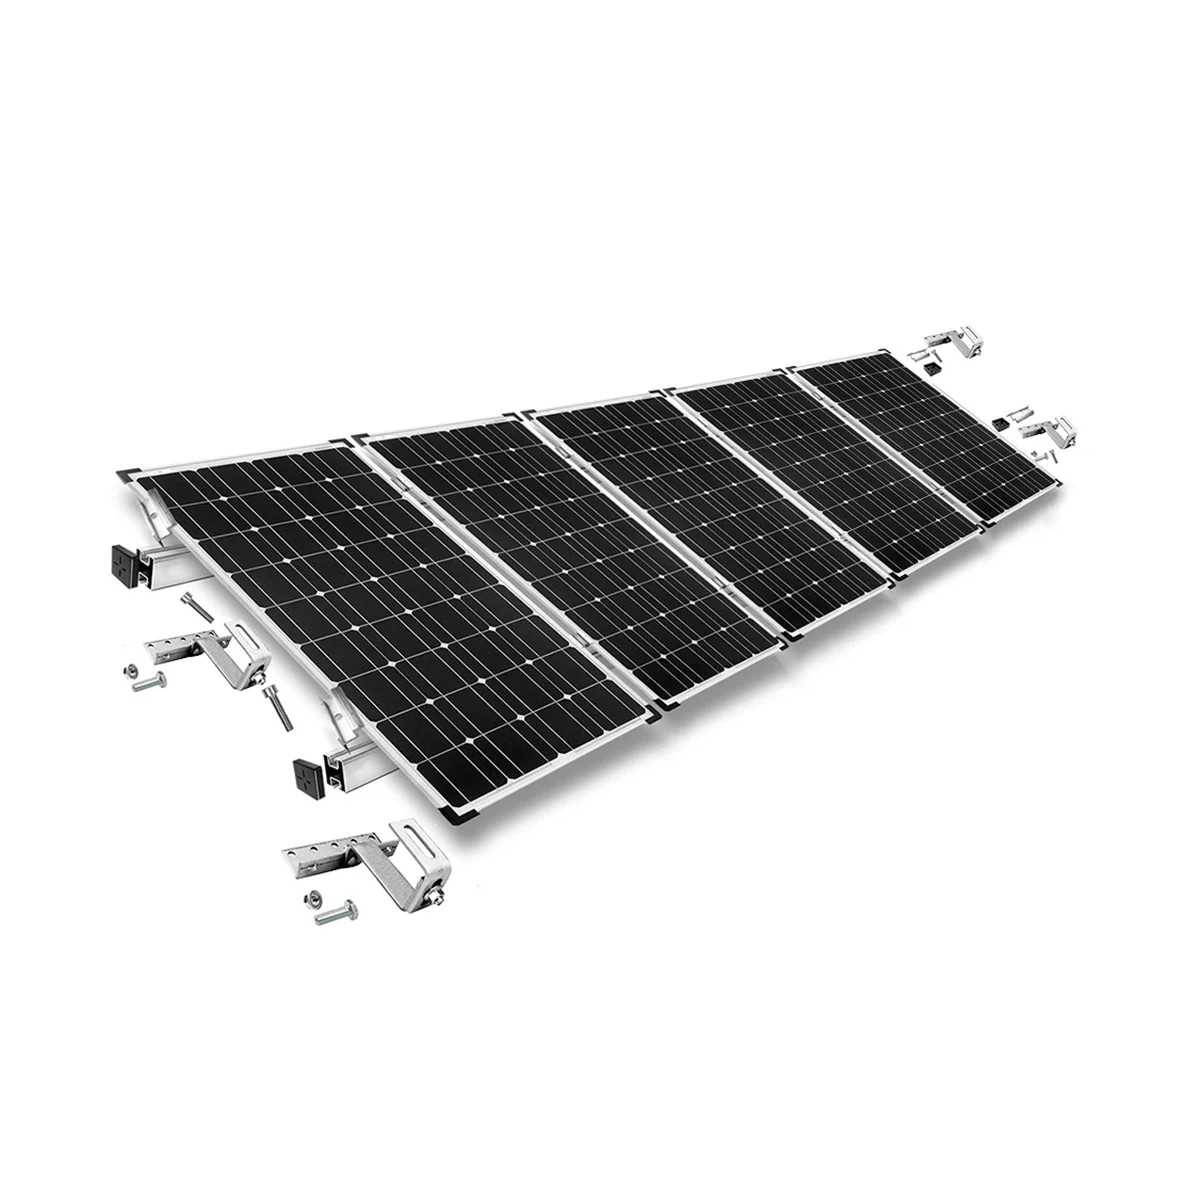 Mounting kit h35 adjustable with roof brackets (for tiles) for sloping roof 5 solar panels frame 35 mm